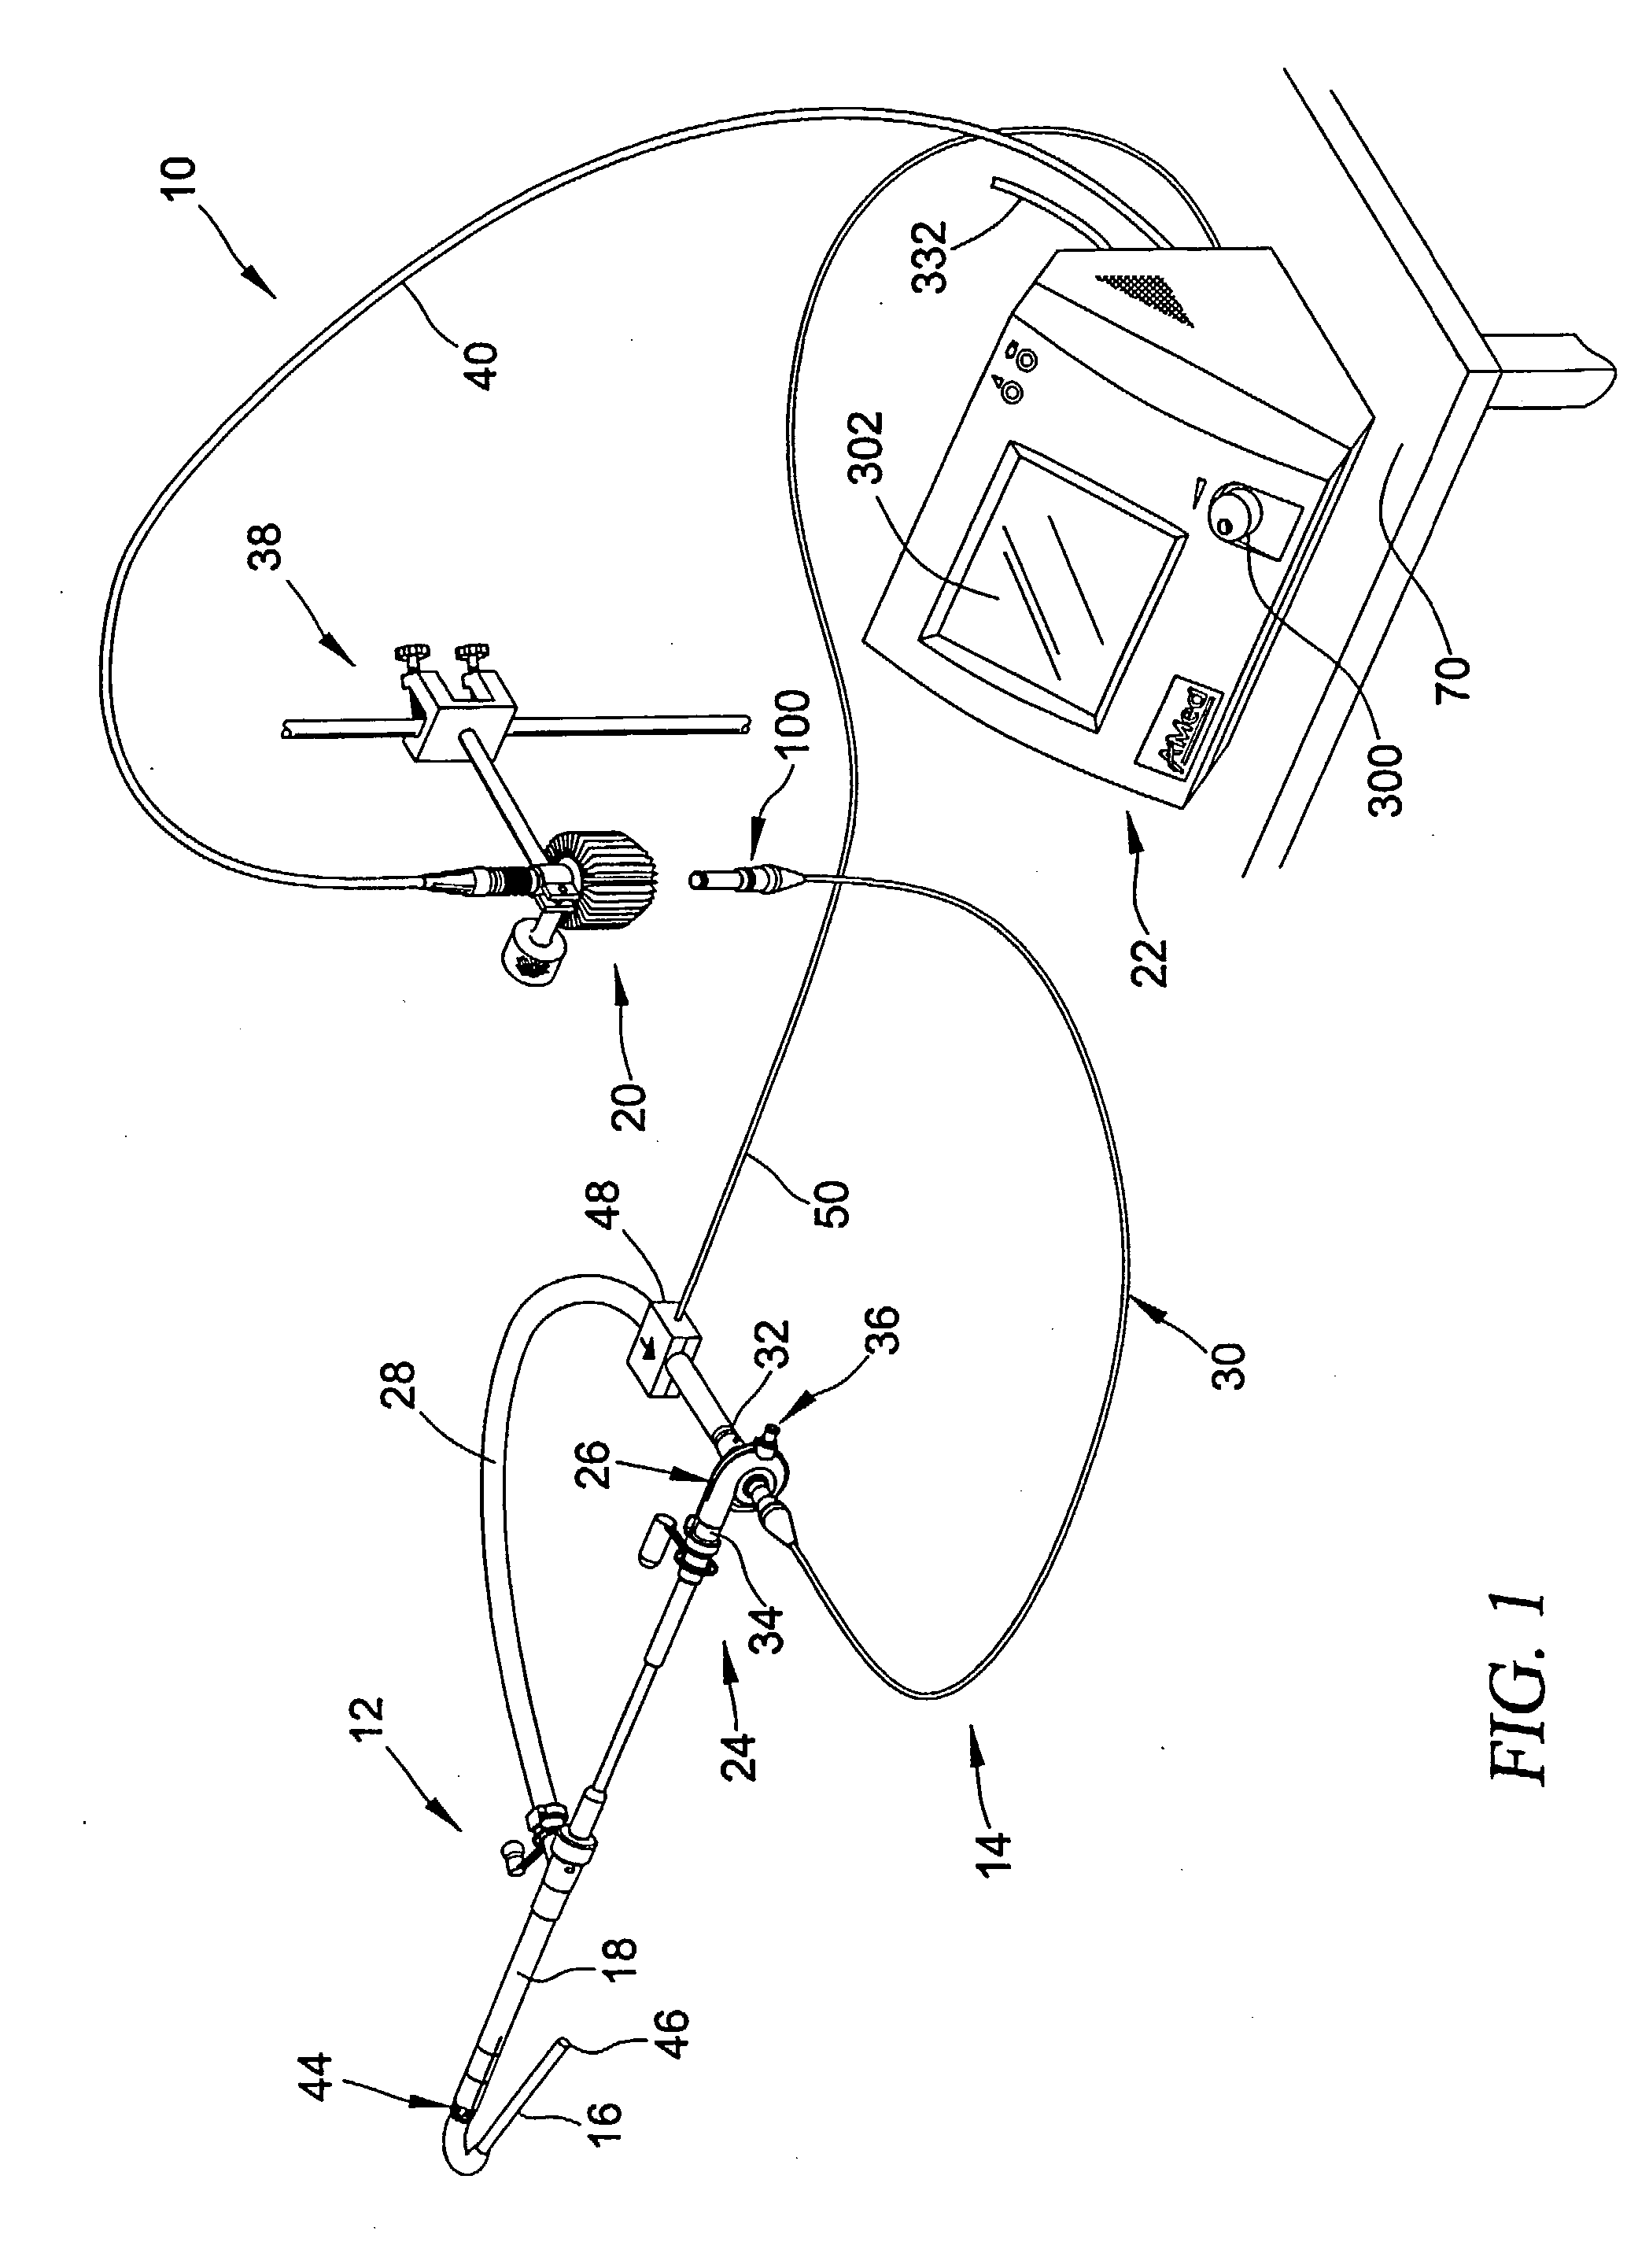 Cannulation system and related methods